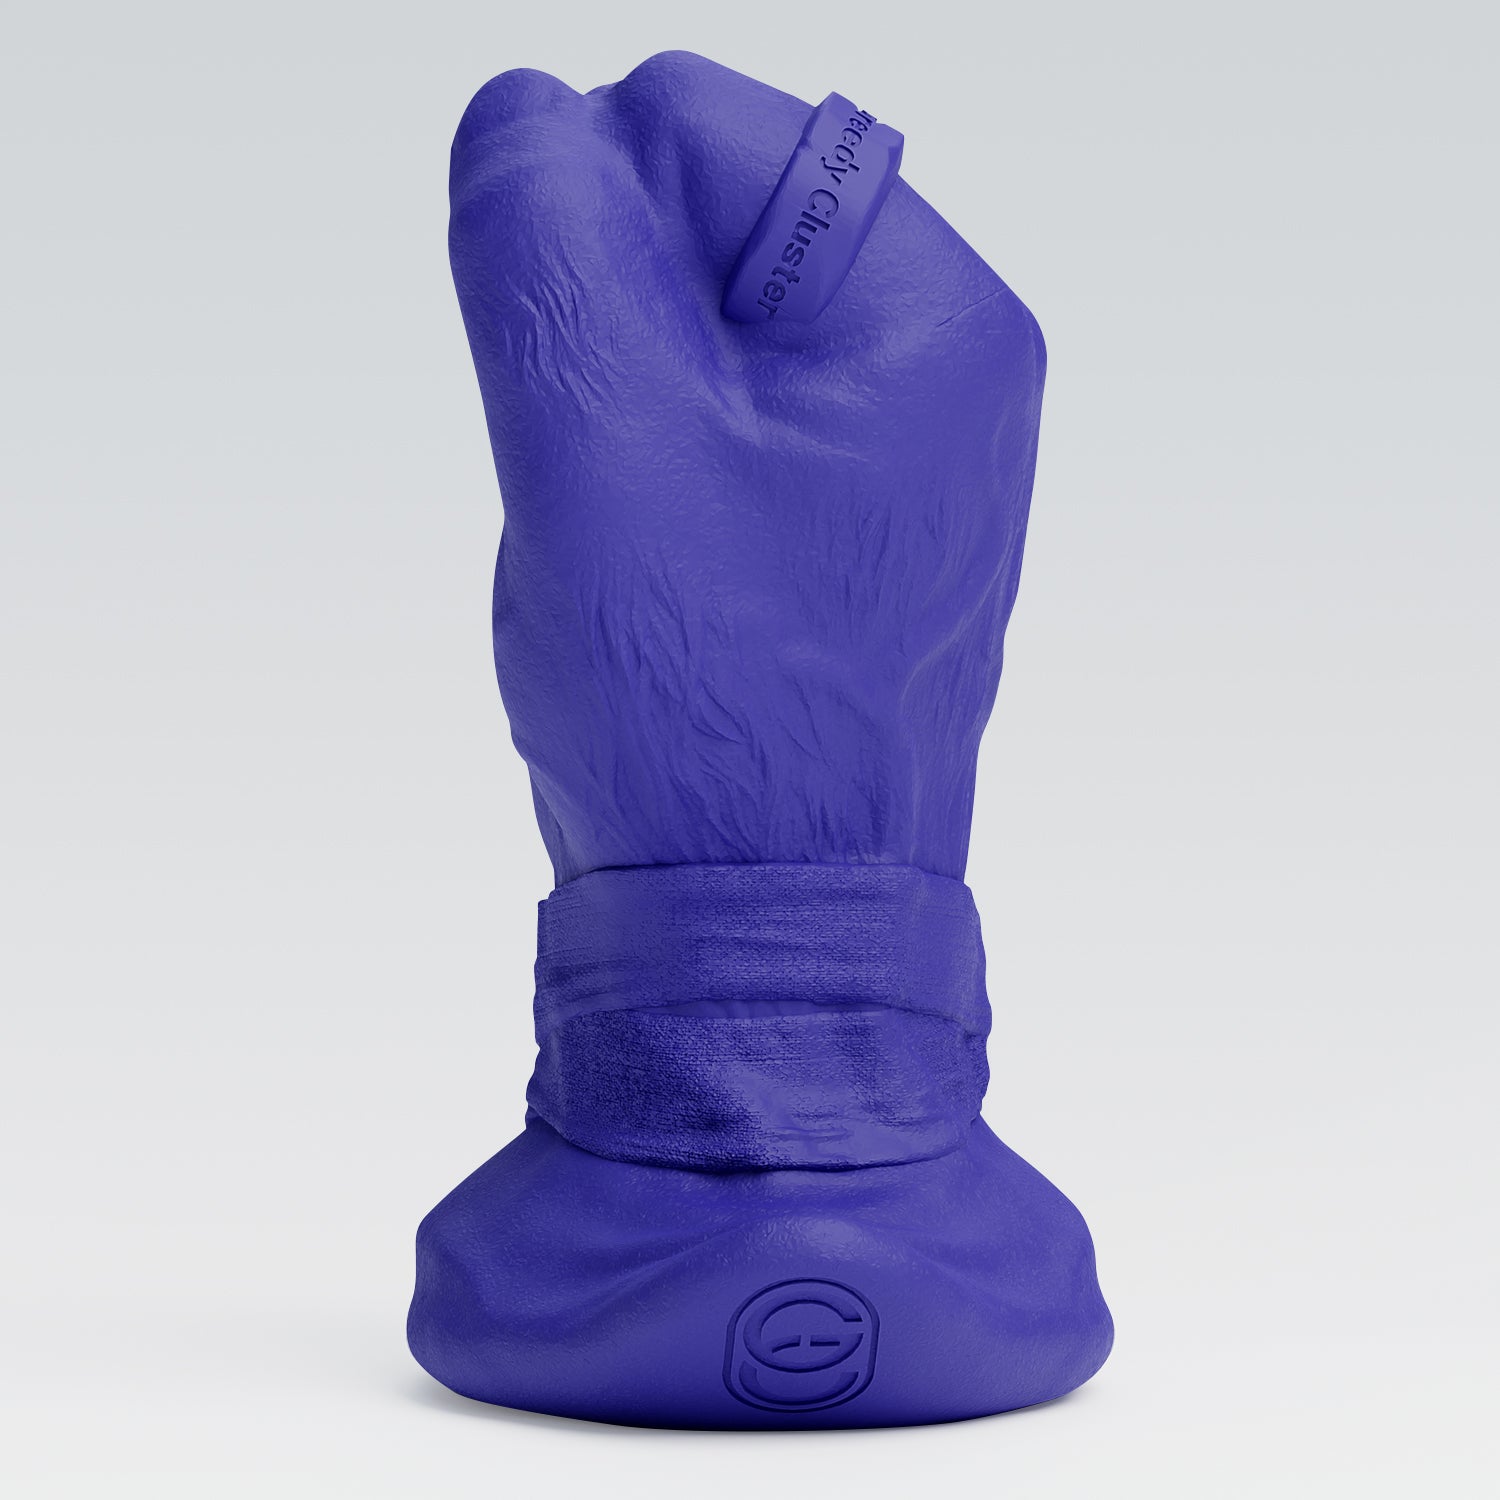 fist dildo,punch sex toys for anal fisting-blue color